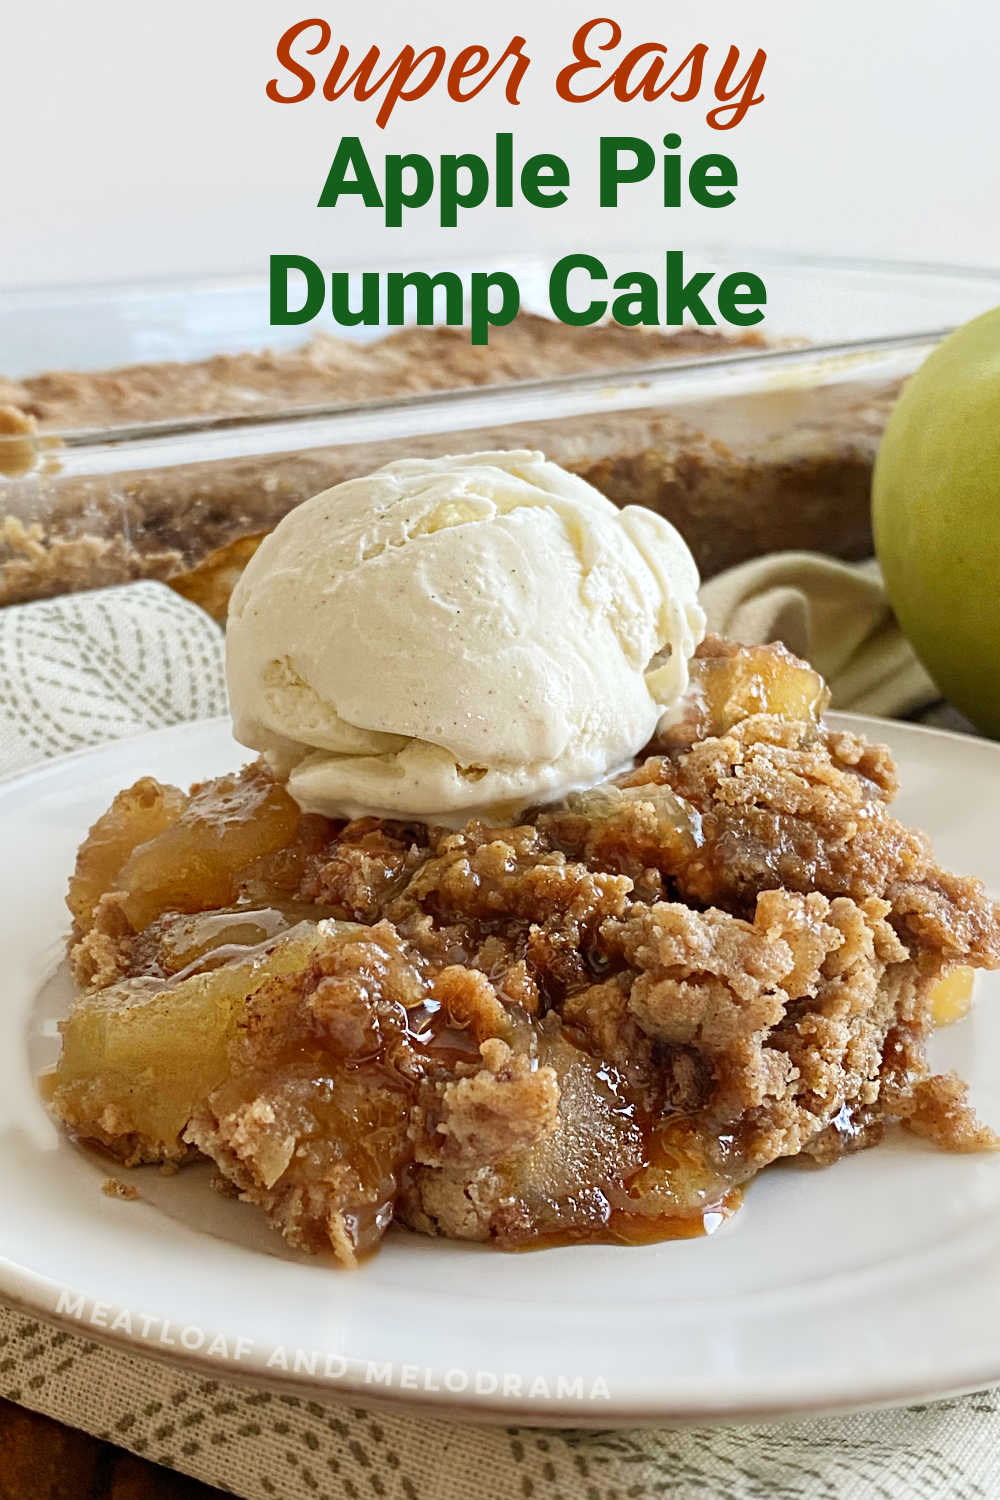 This Apple Pie Dump Cake recipe made with just 3 ingredients is an easy dessert recipe that is warm, cozy and the perfect dessert for fall. Top with a scoop of vanilla ice cream and caramel sauce, and your entire family will thank you!  via @meamel